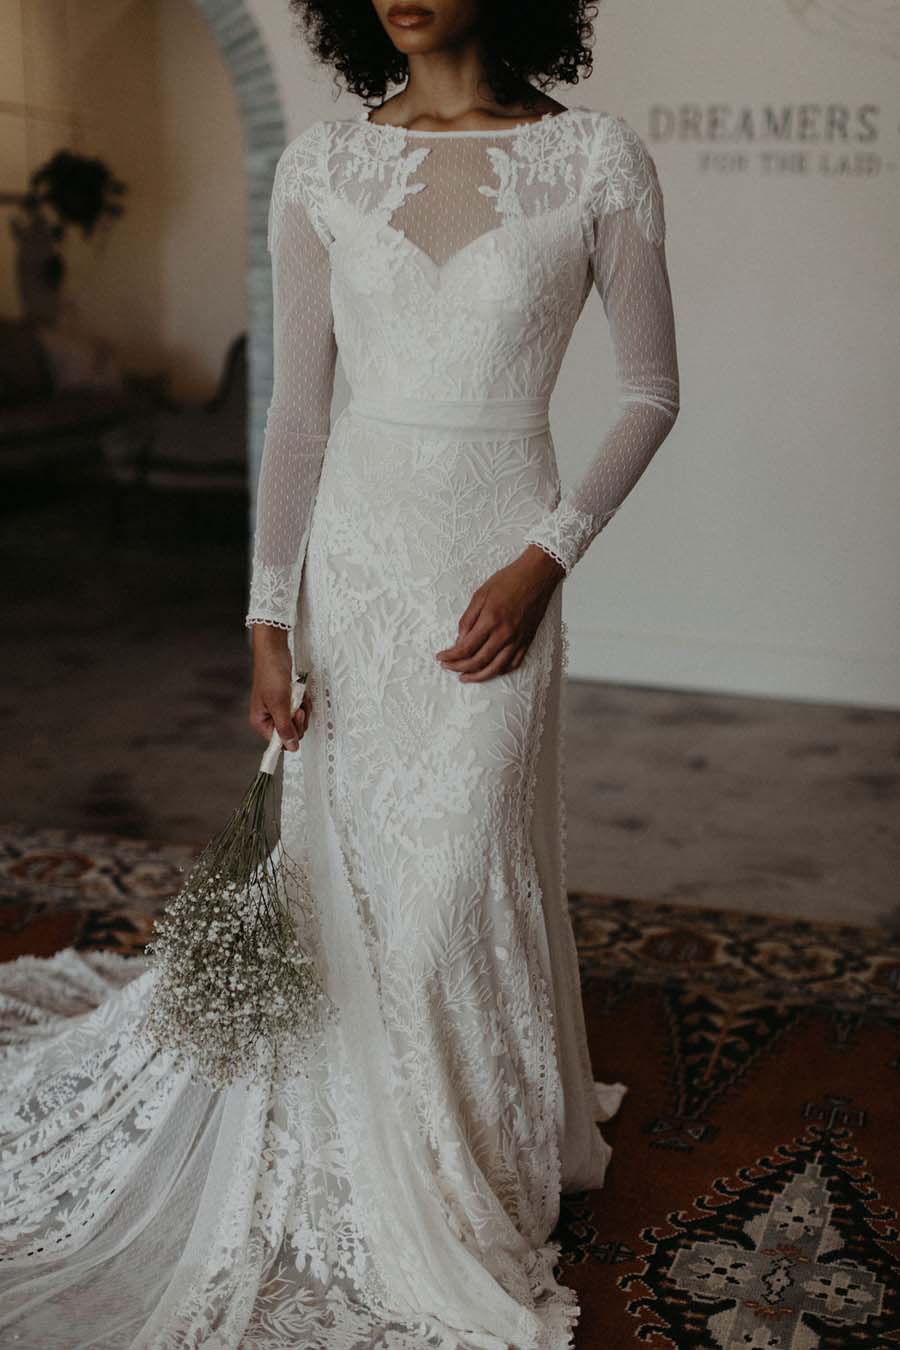 Boho Wedding Dress Brand Dreamers & Lovers Launches Flagship and Adds ...